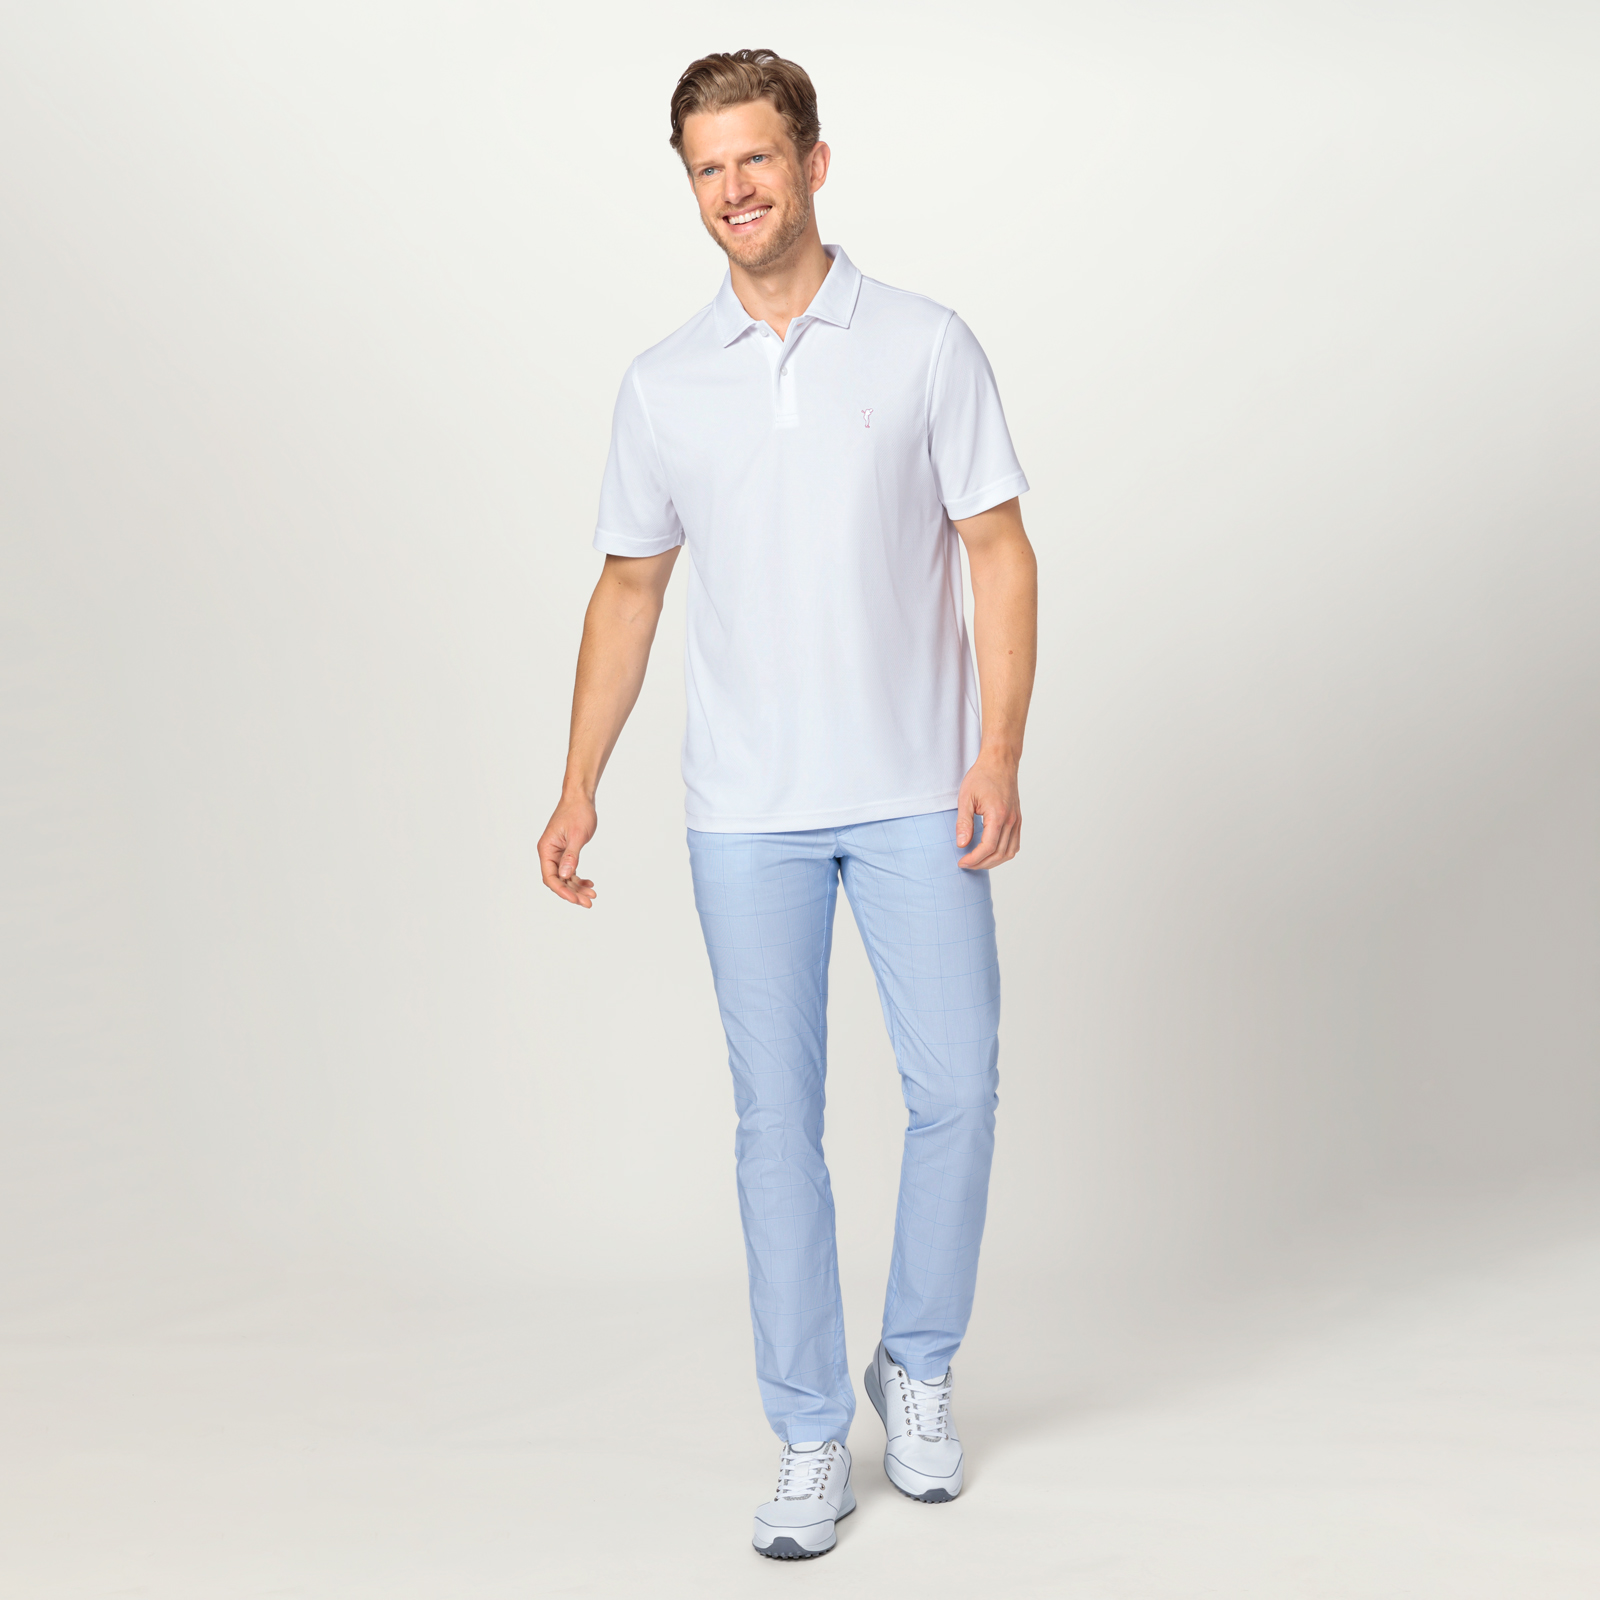 Men's golf shirt containing sustainable Kafetex® functional fibre